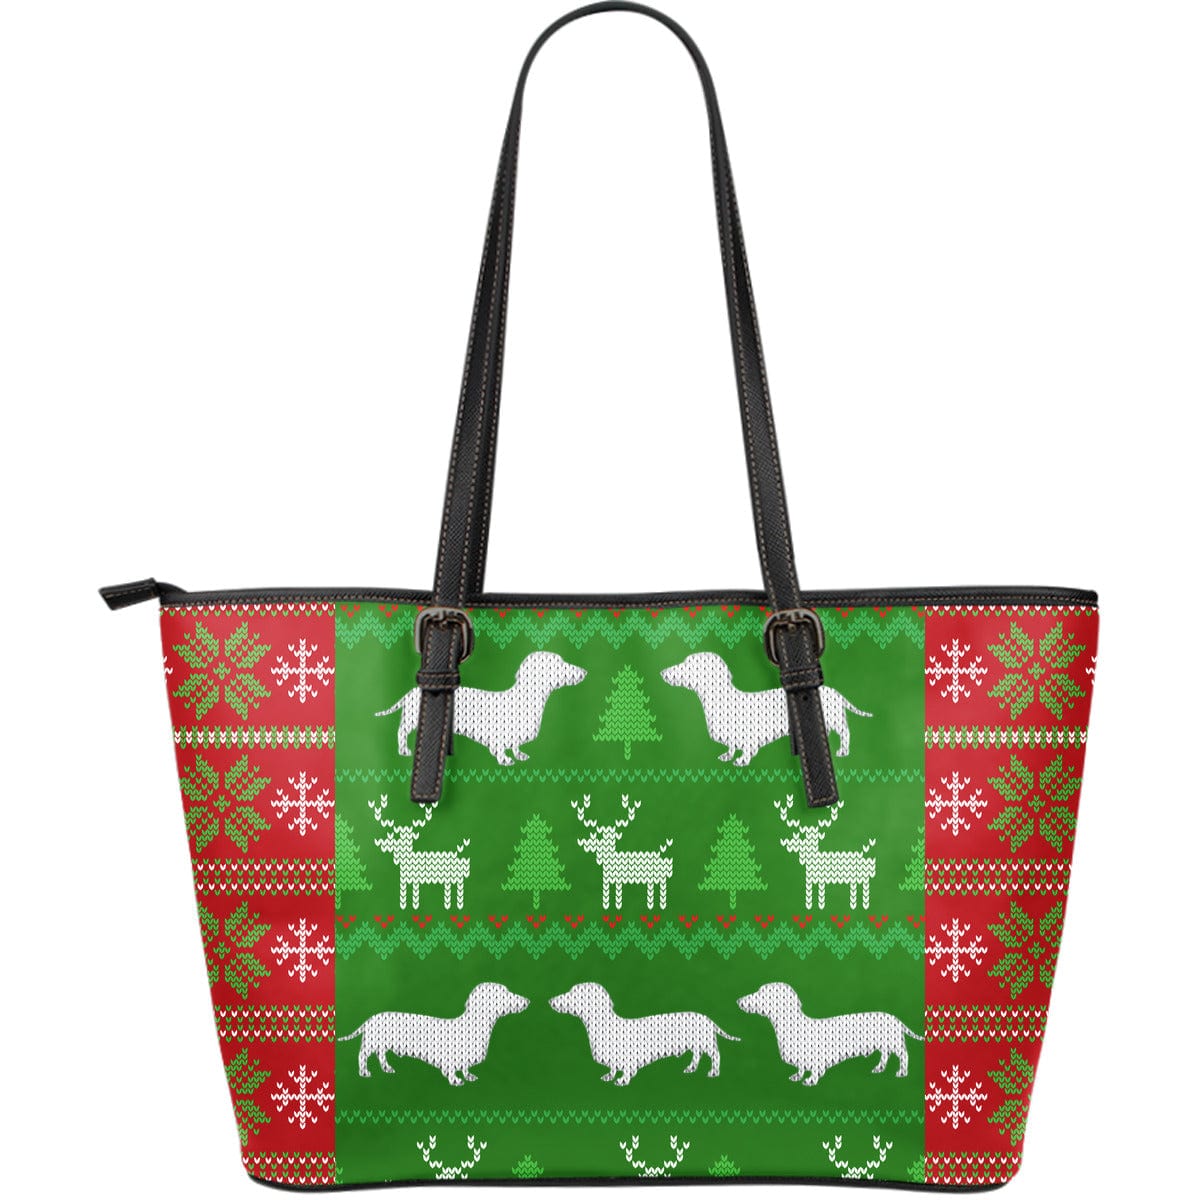 Leather Tote Bag - Ugly Christmas Sweater With Dachshunds - GiddyGoatStore